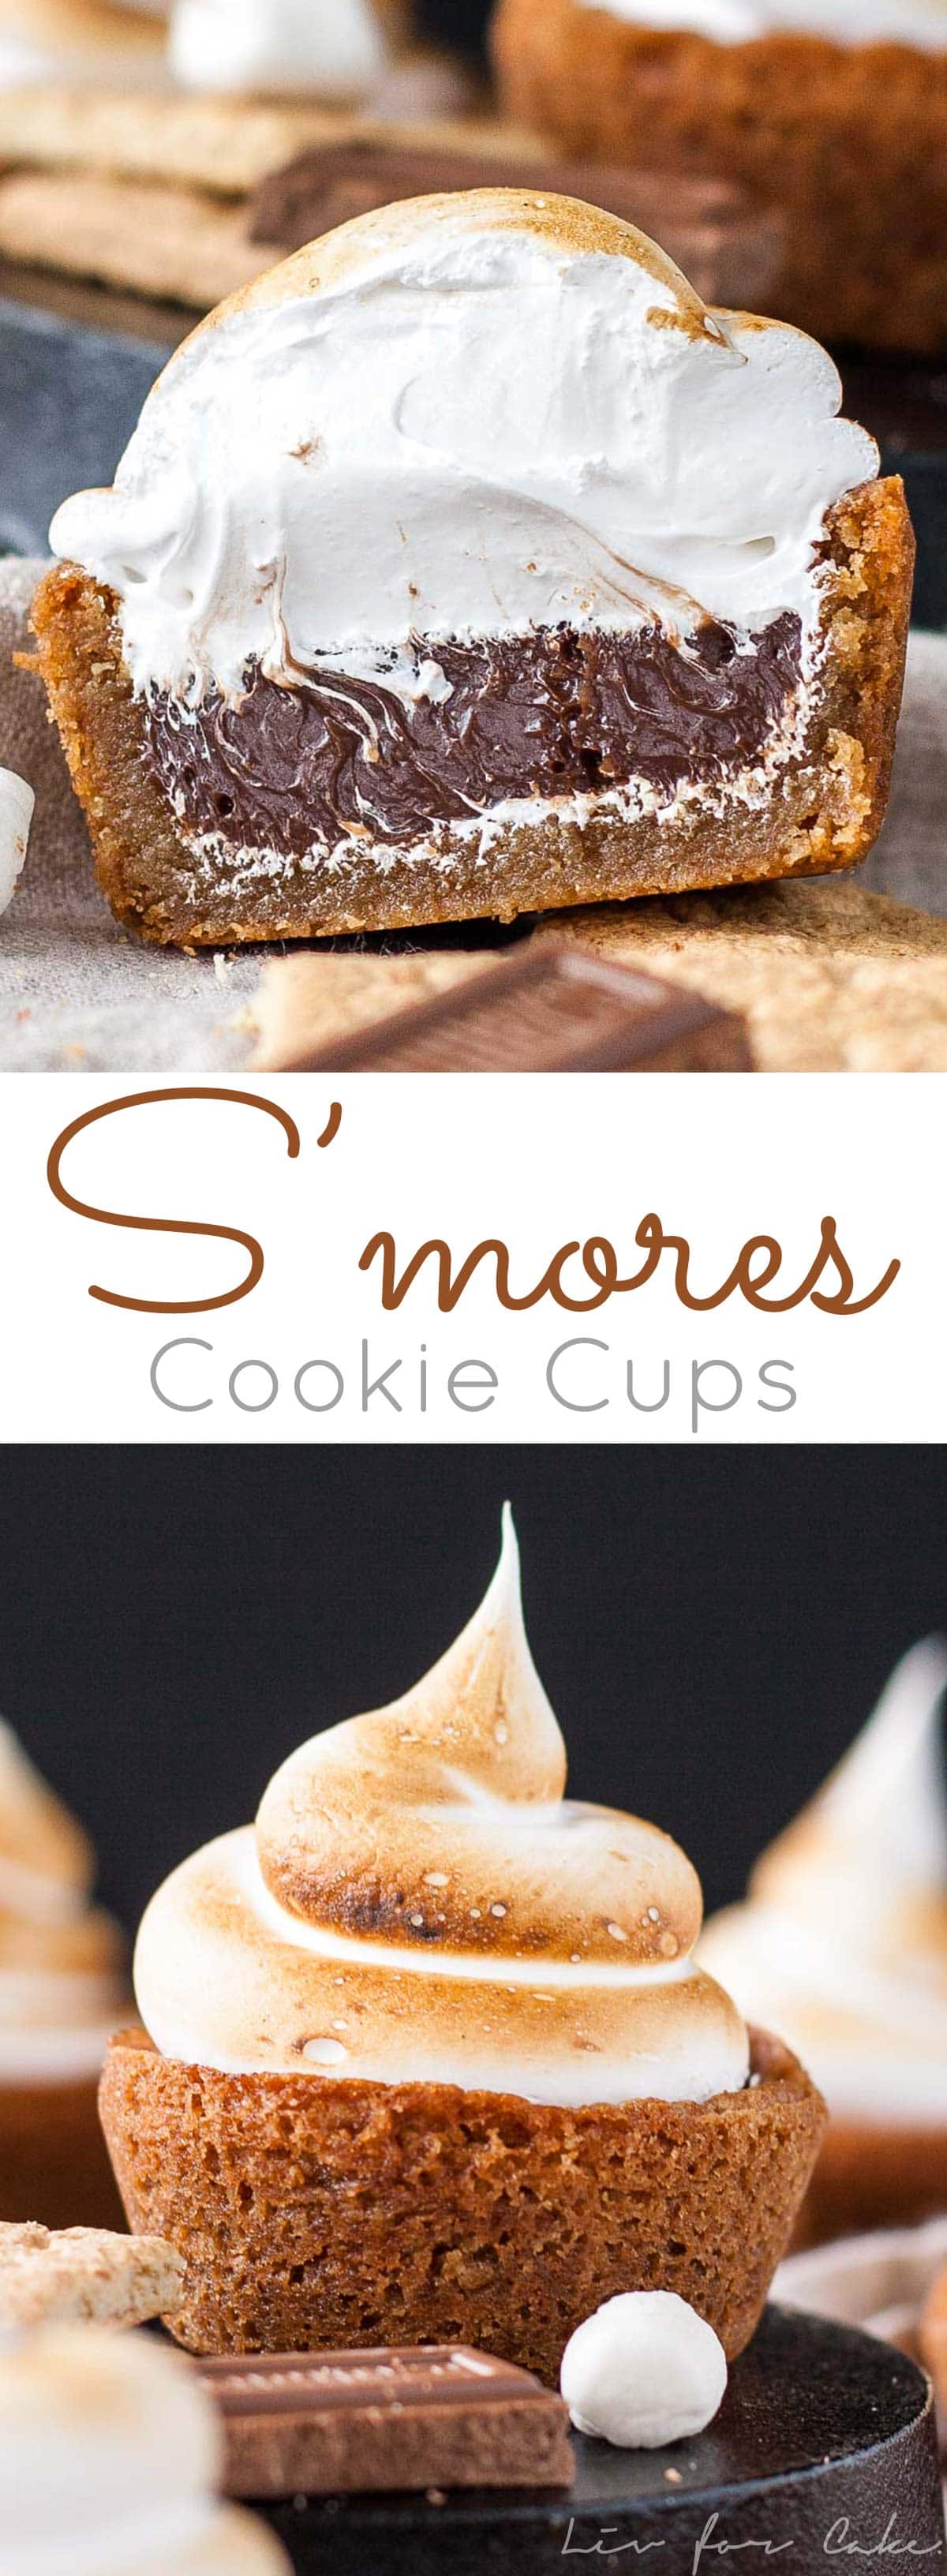 Cookie cup photo collage